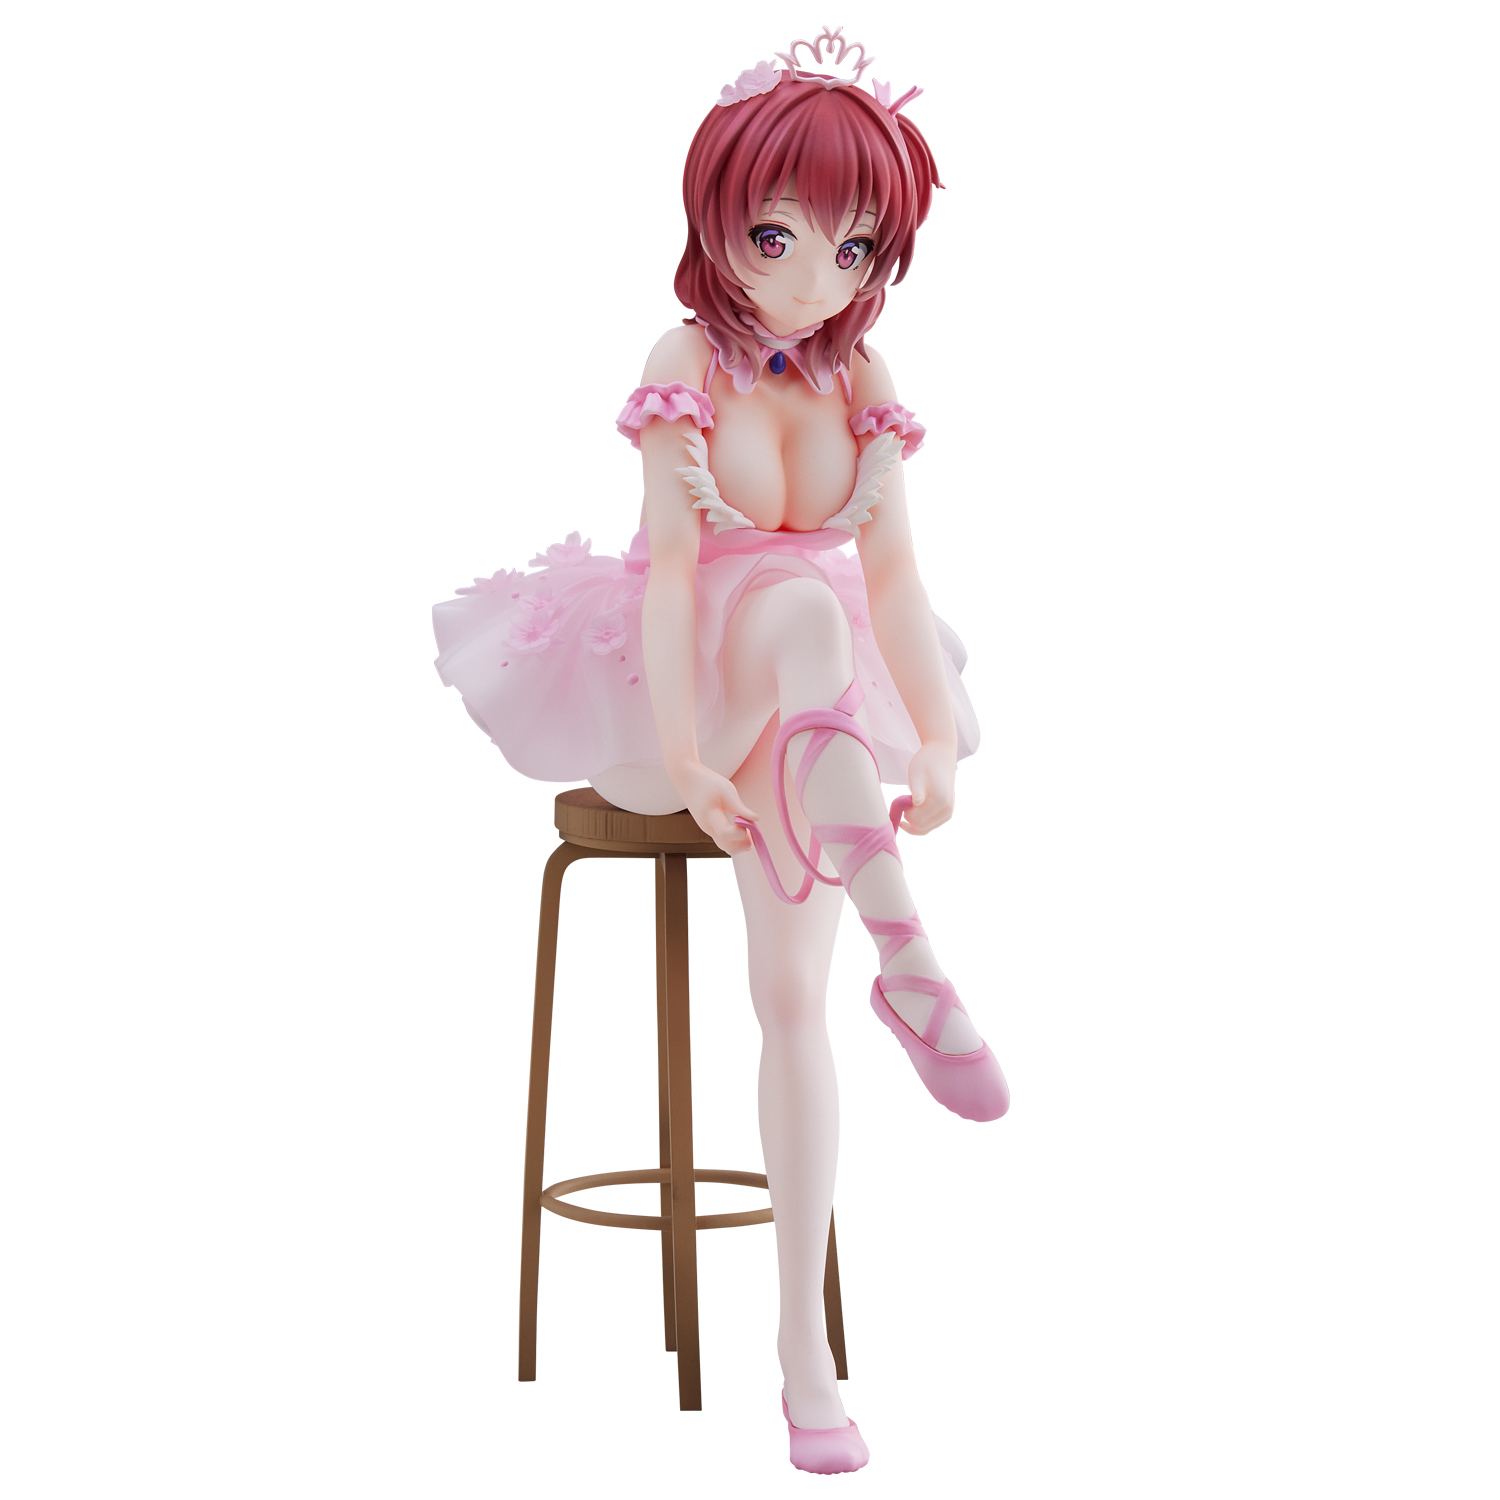 Anmi Illustration Pre-Painted Figure: Flamingo Ballet Company Red Hair Girl Union Creative